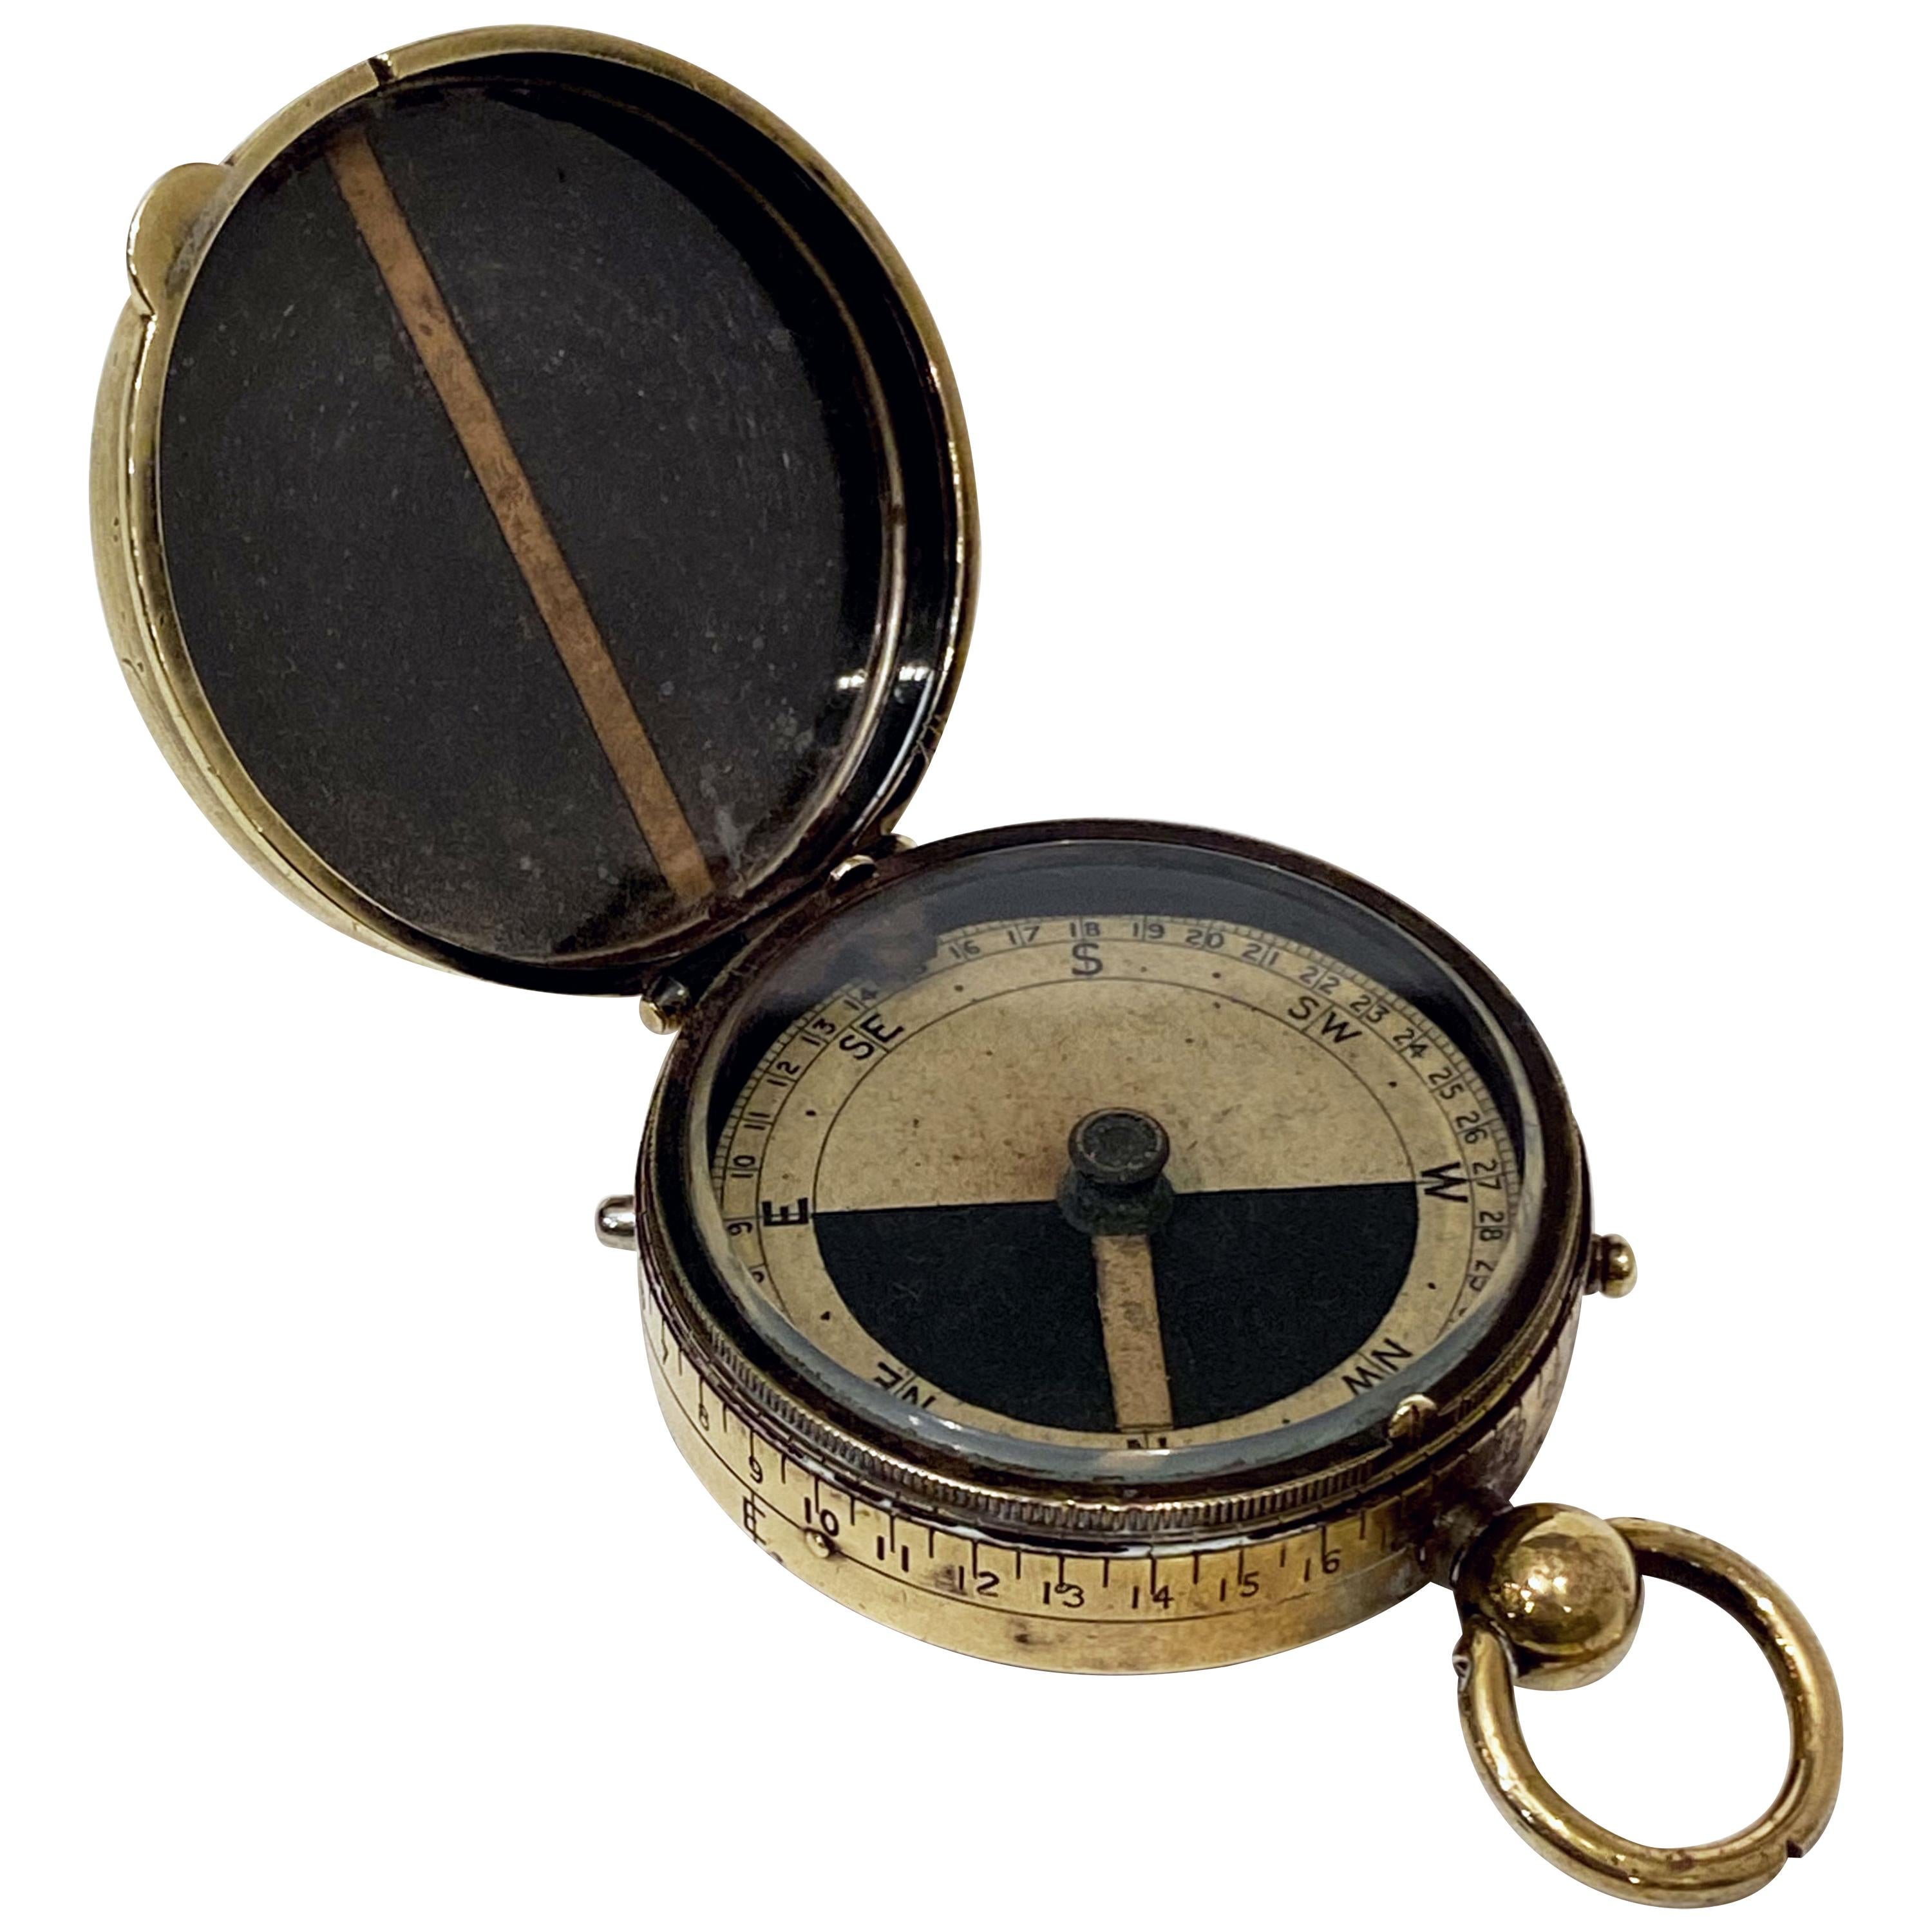 WWI Military Officer's Marching Compass, Cbynite Radium Compass